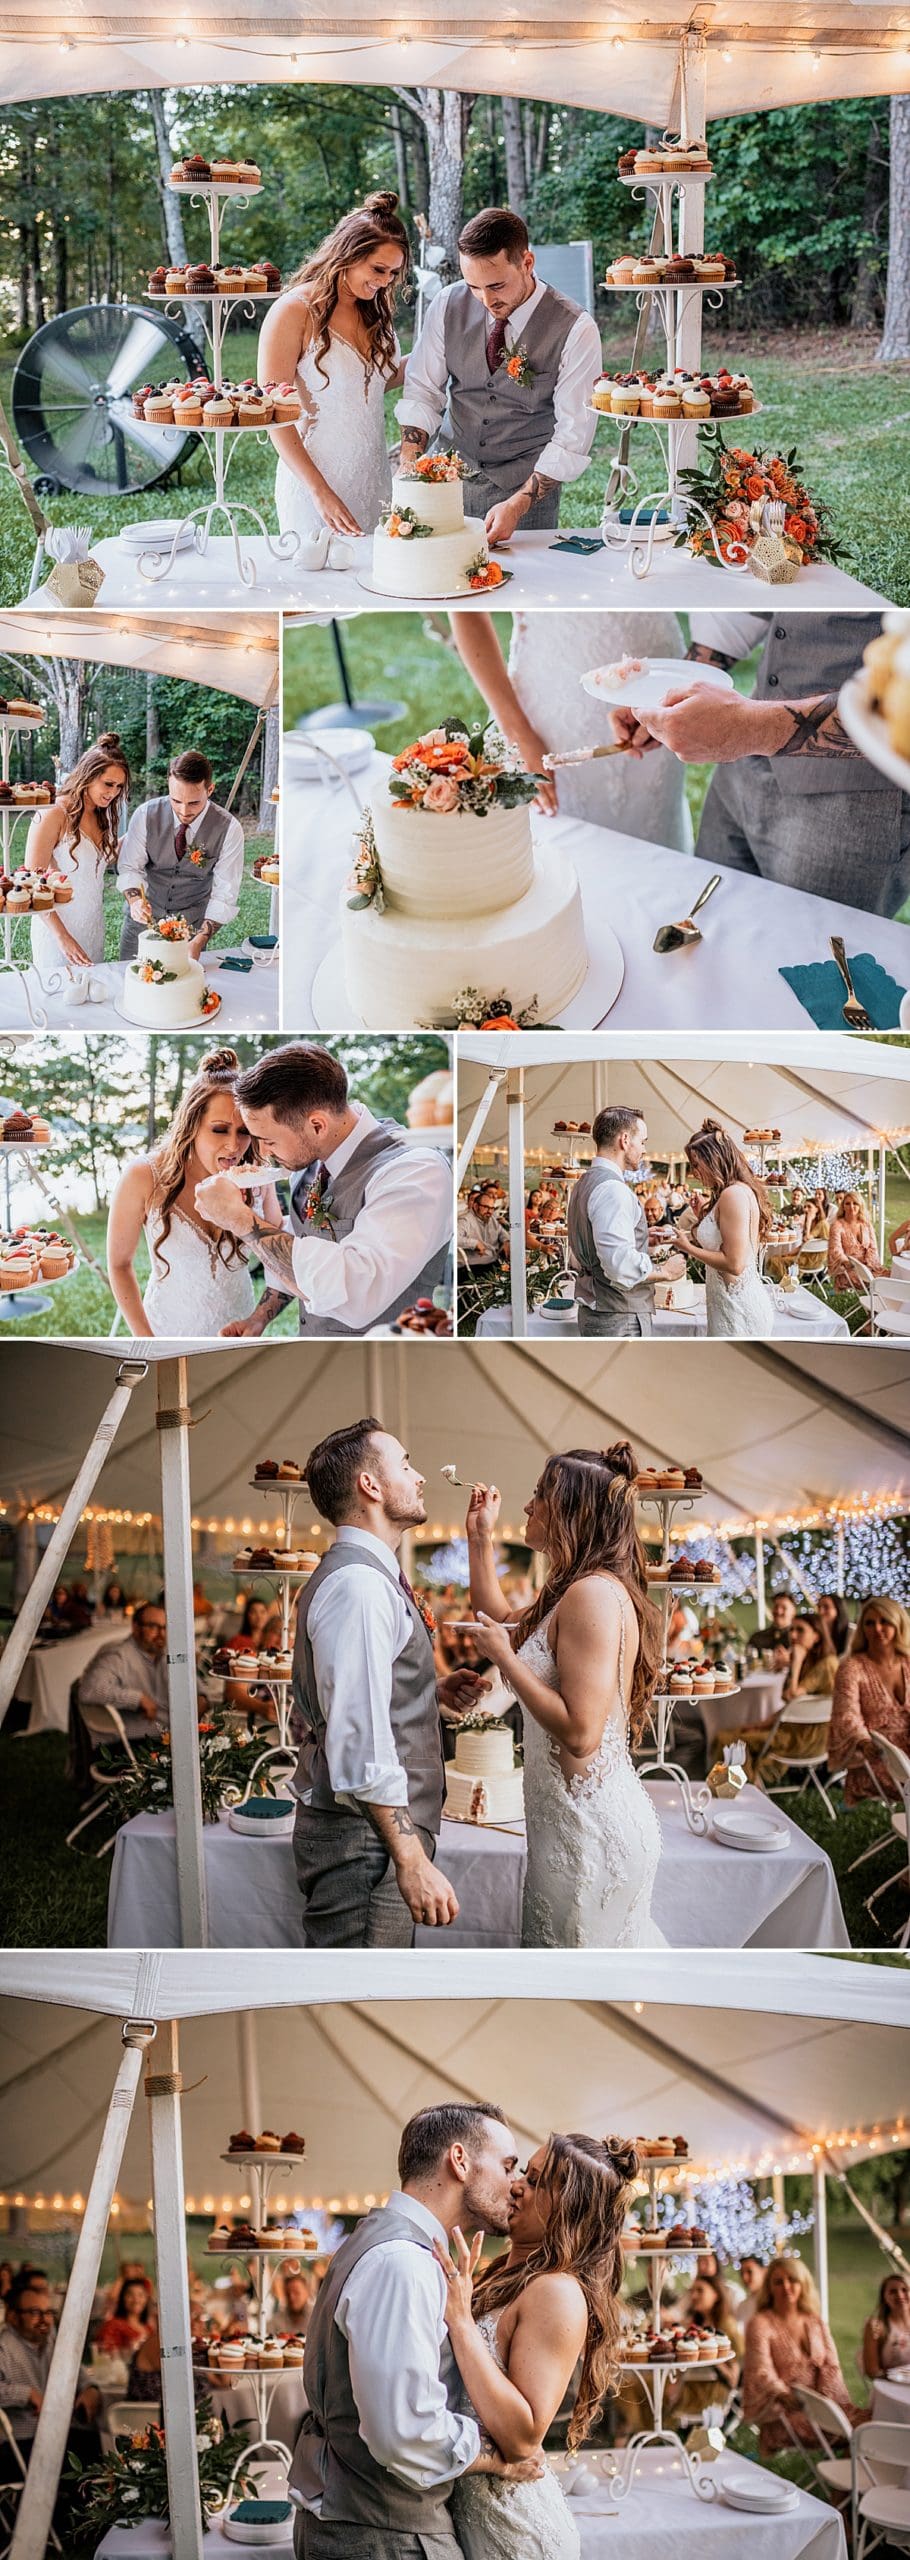 wedding couple cutting cake outside tented reception